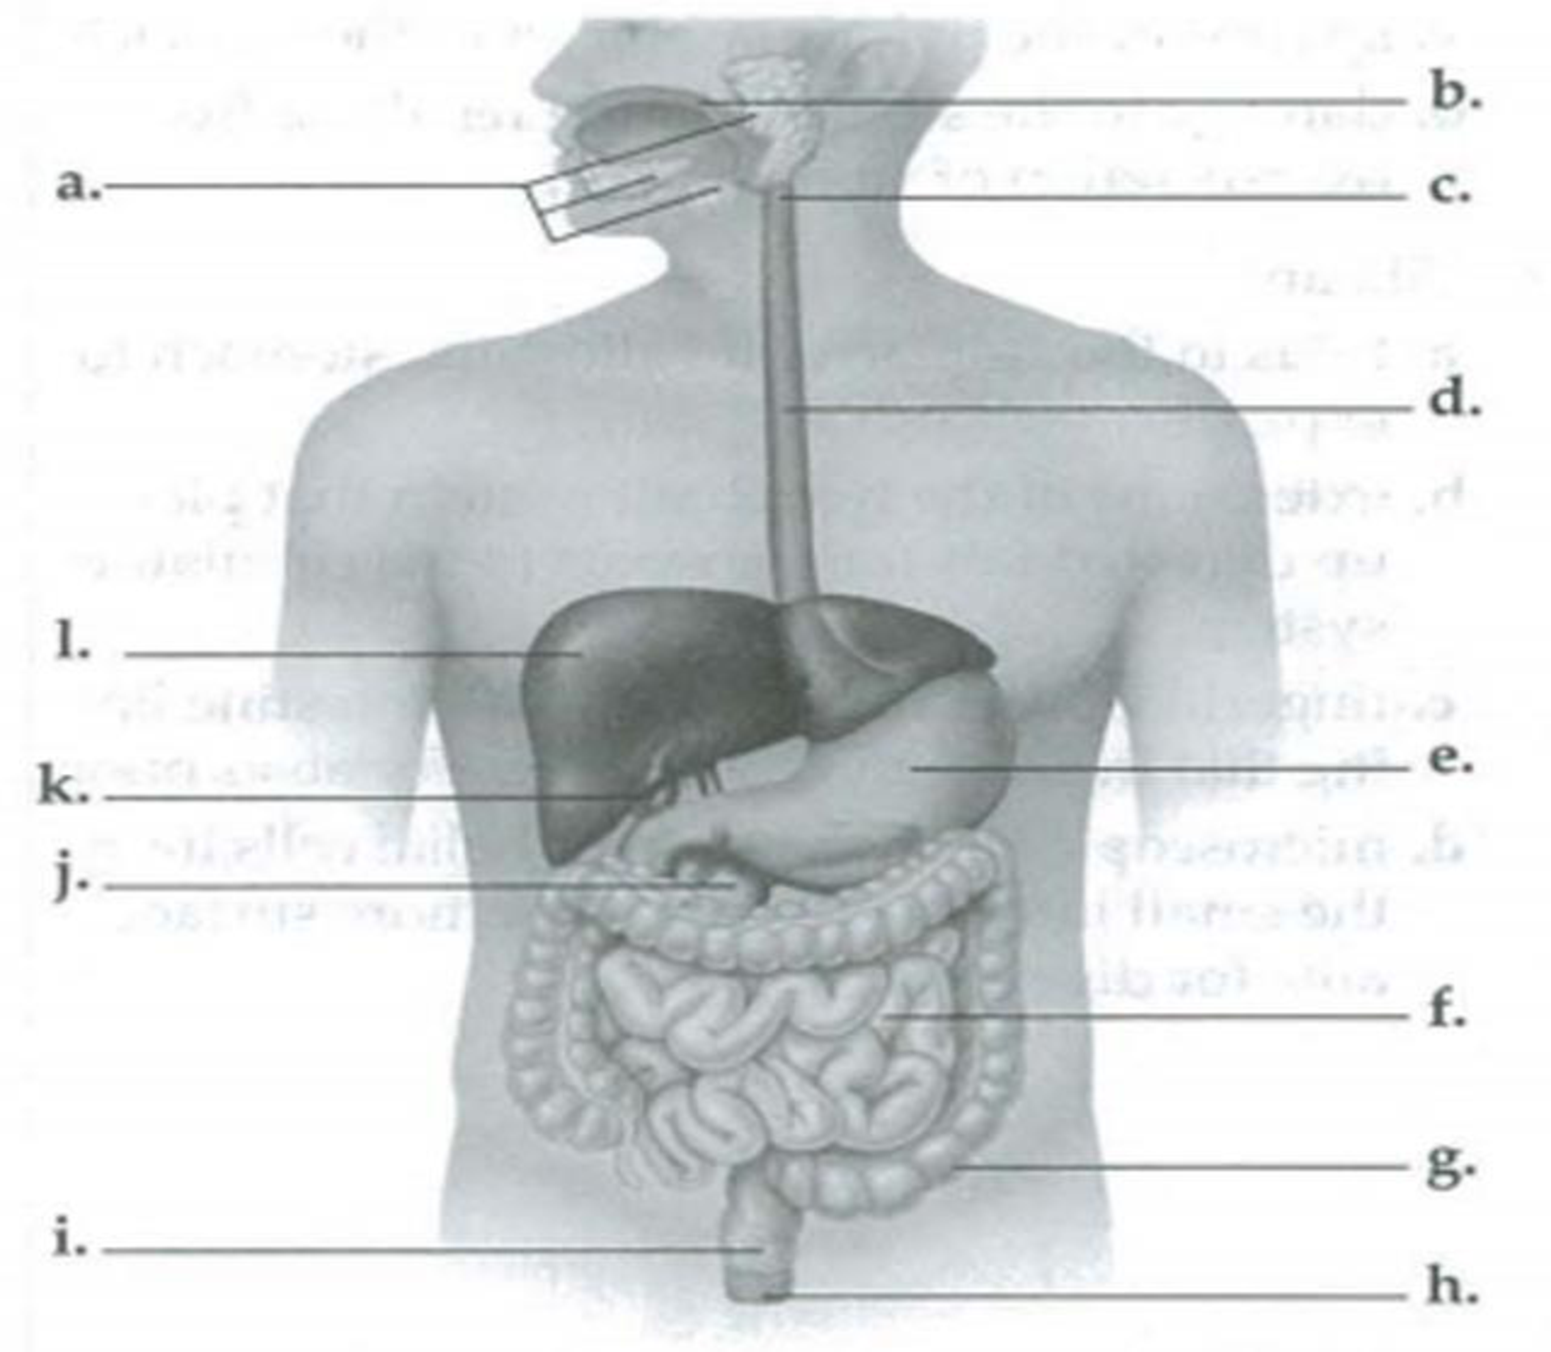 Chapter 41, Problem 1SYK, Label the indicated structures in the following diagram of the human digestive system. Review the 